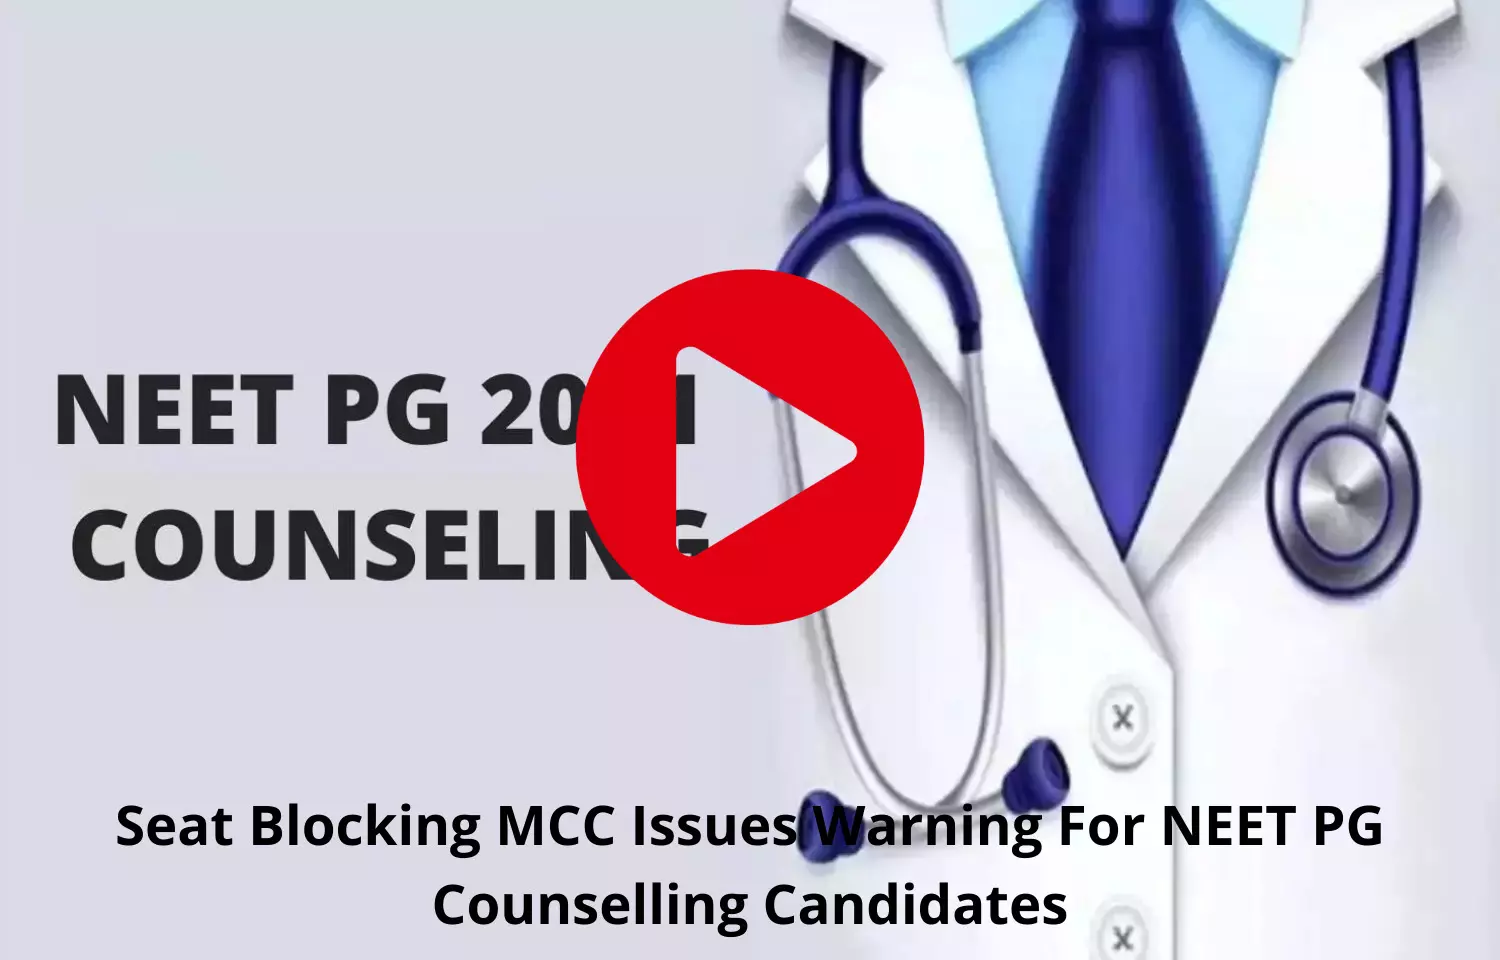 Seat Blocking MCC Issues Warning For NEET PG Counselling Candidates